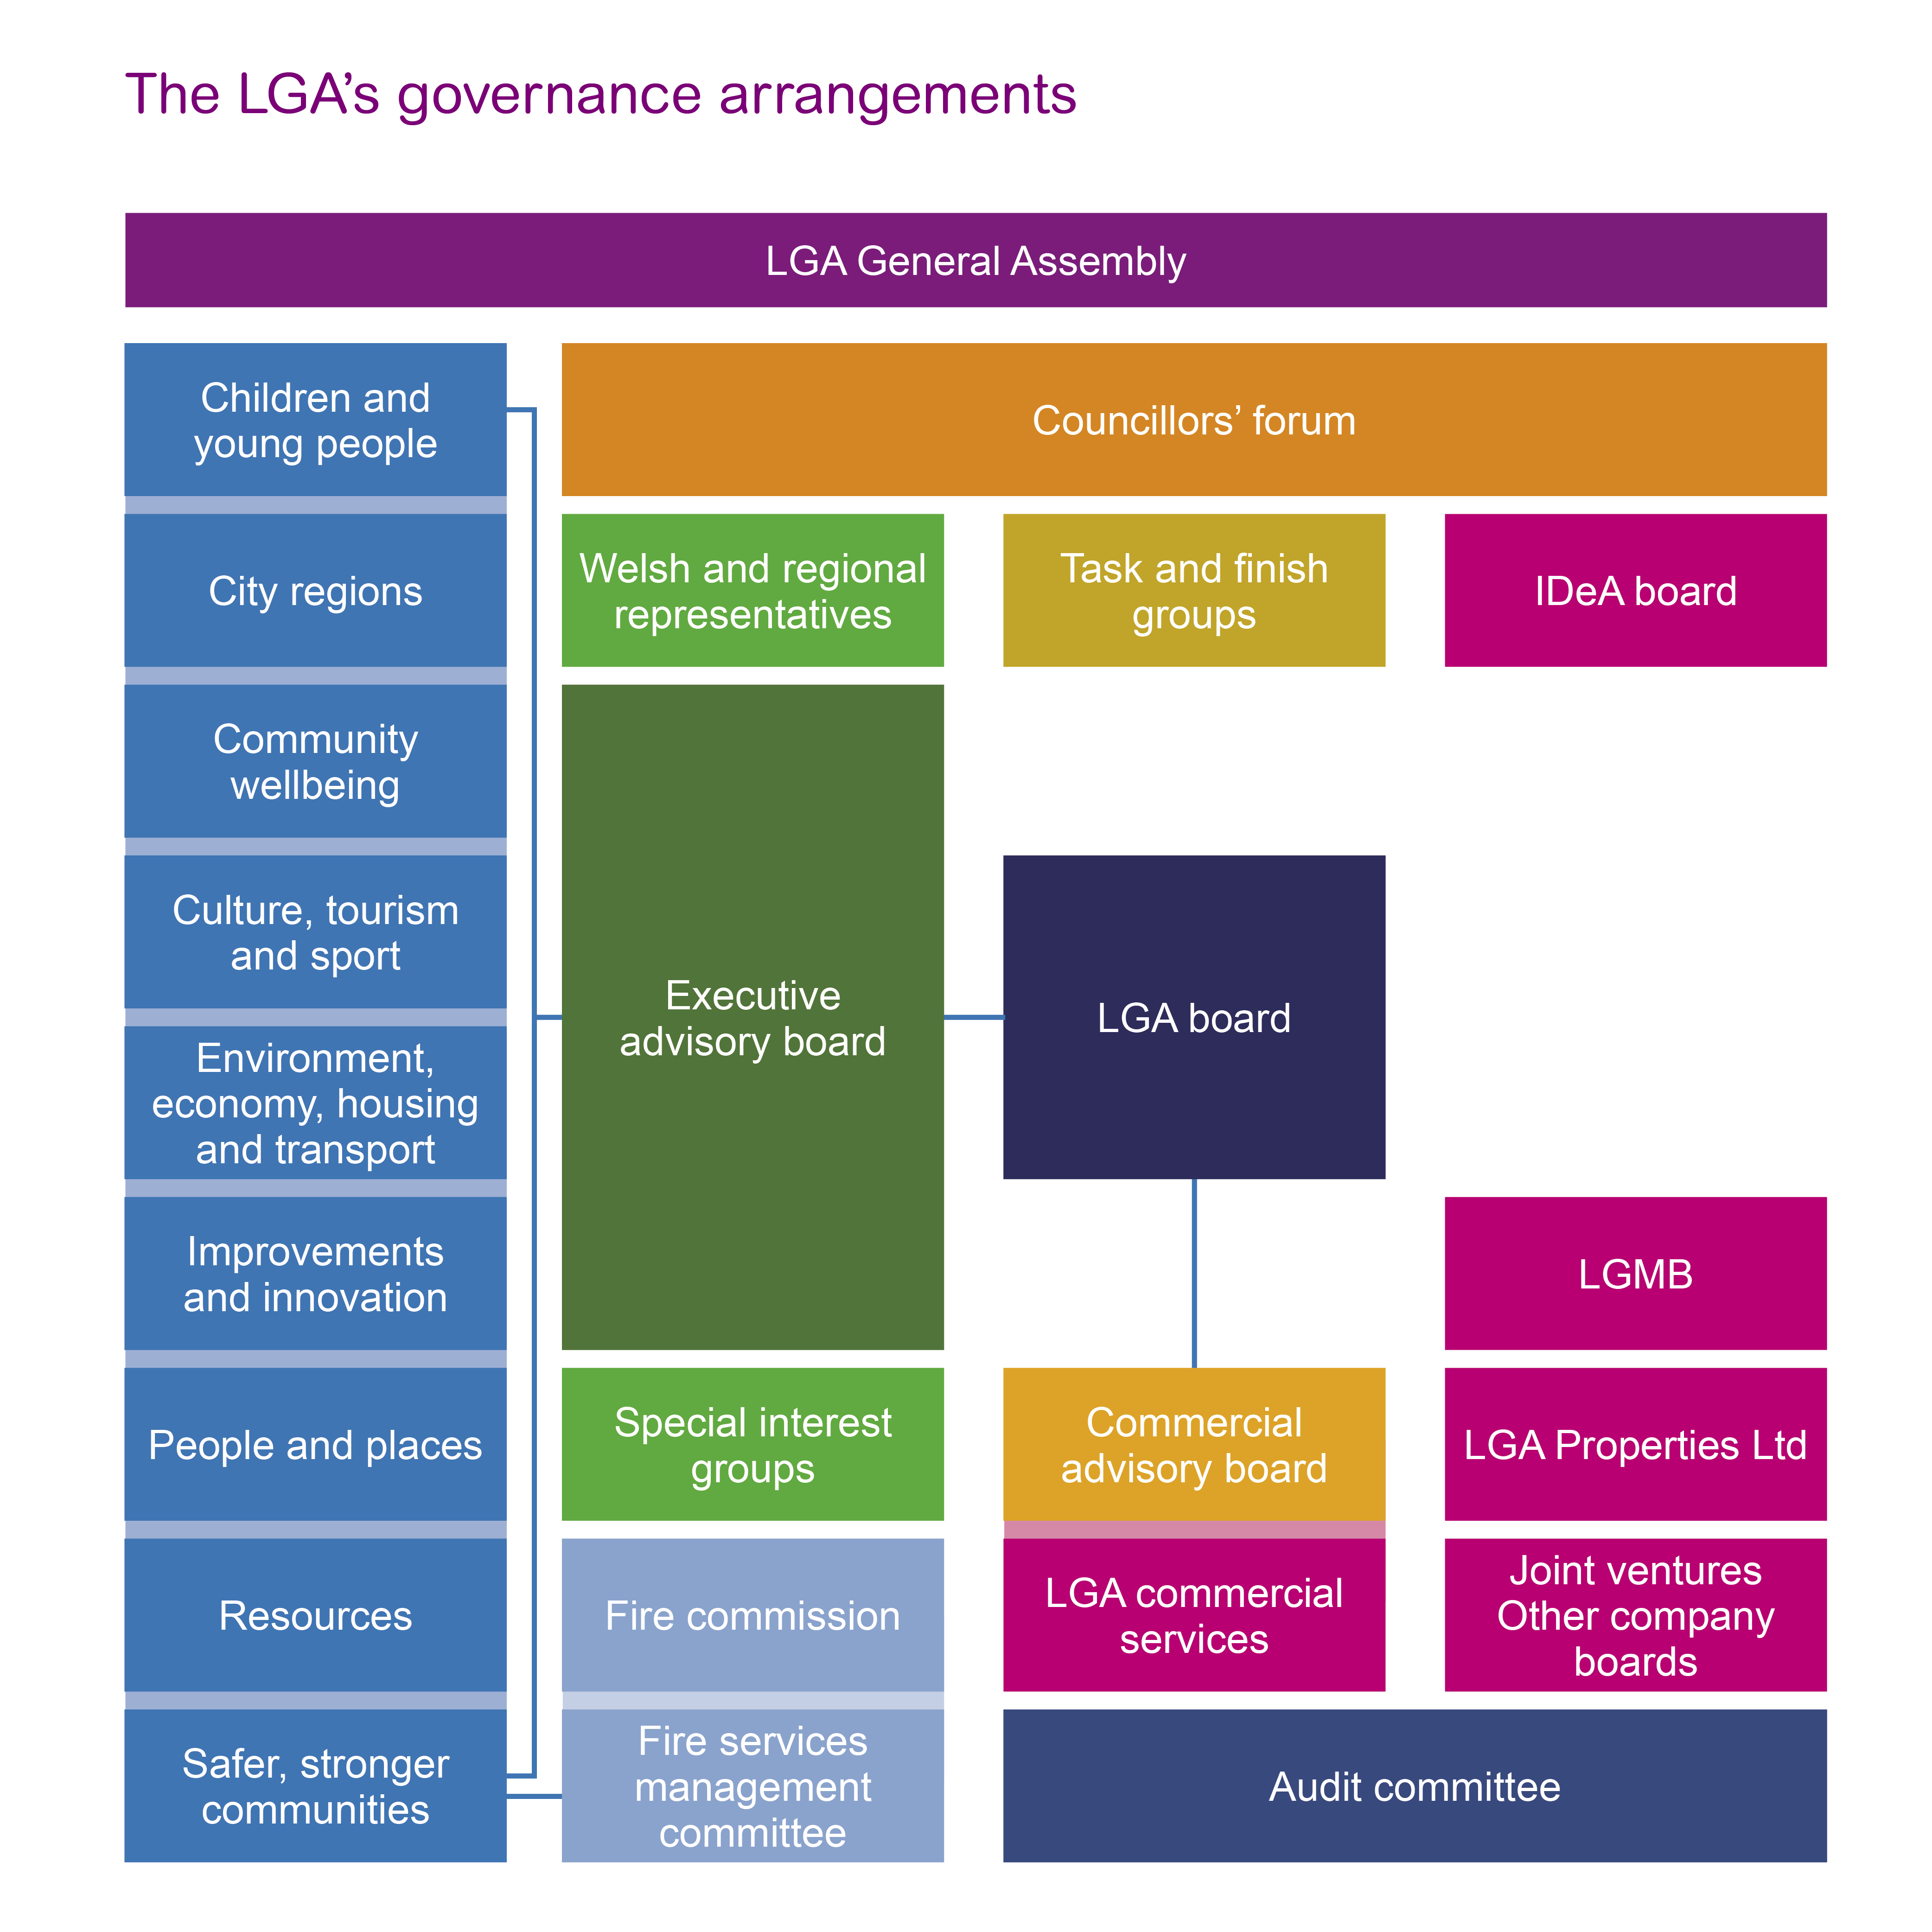 Picture illustrating the LGA's governance structure in wireframe format